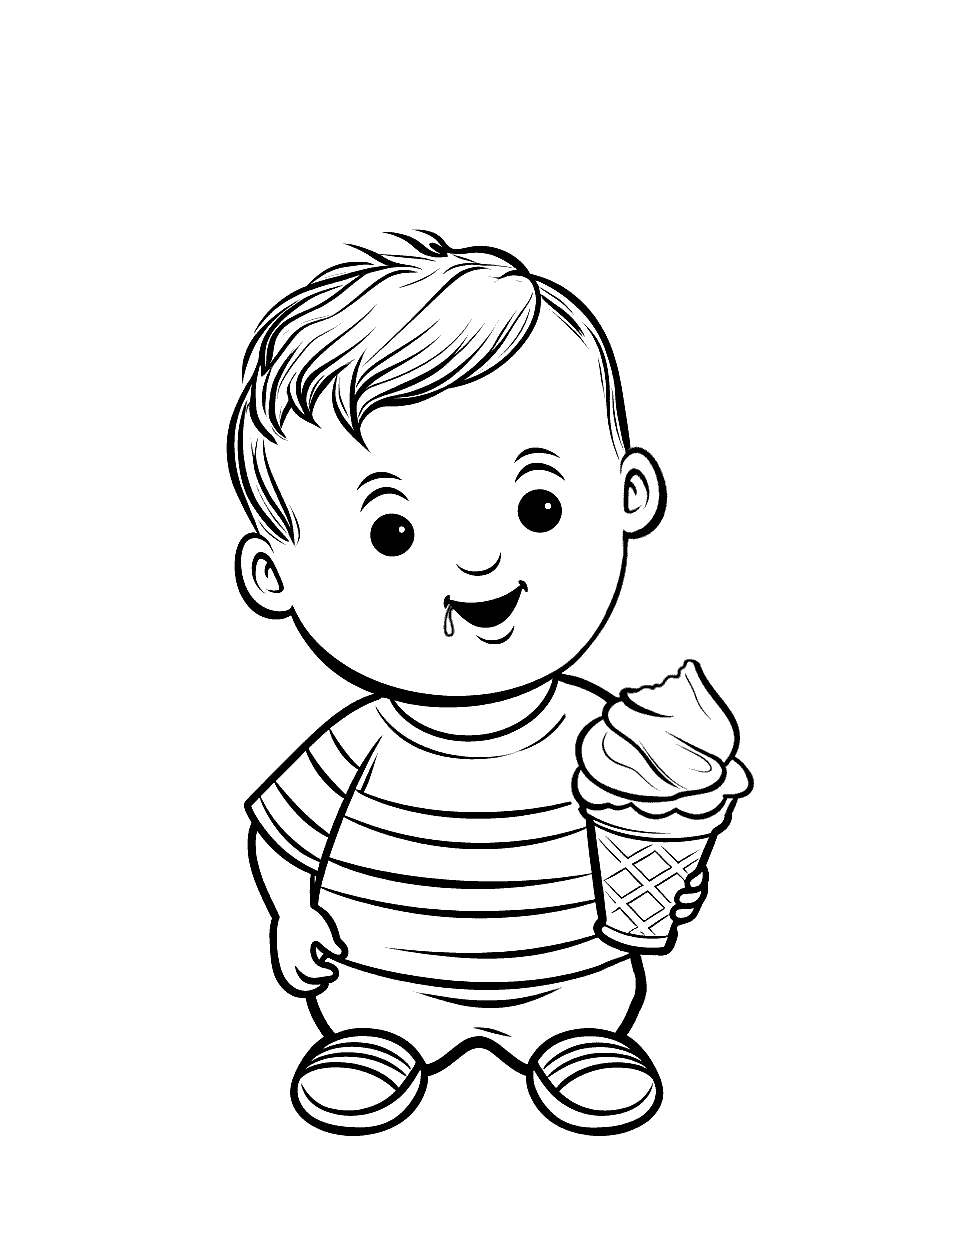 Baby's First Ice Cream Coloring Page - A baby taking a tiny bite from a mini ice cream cone.